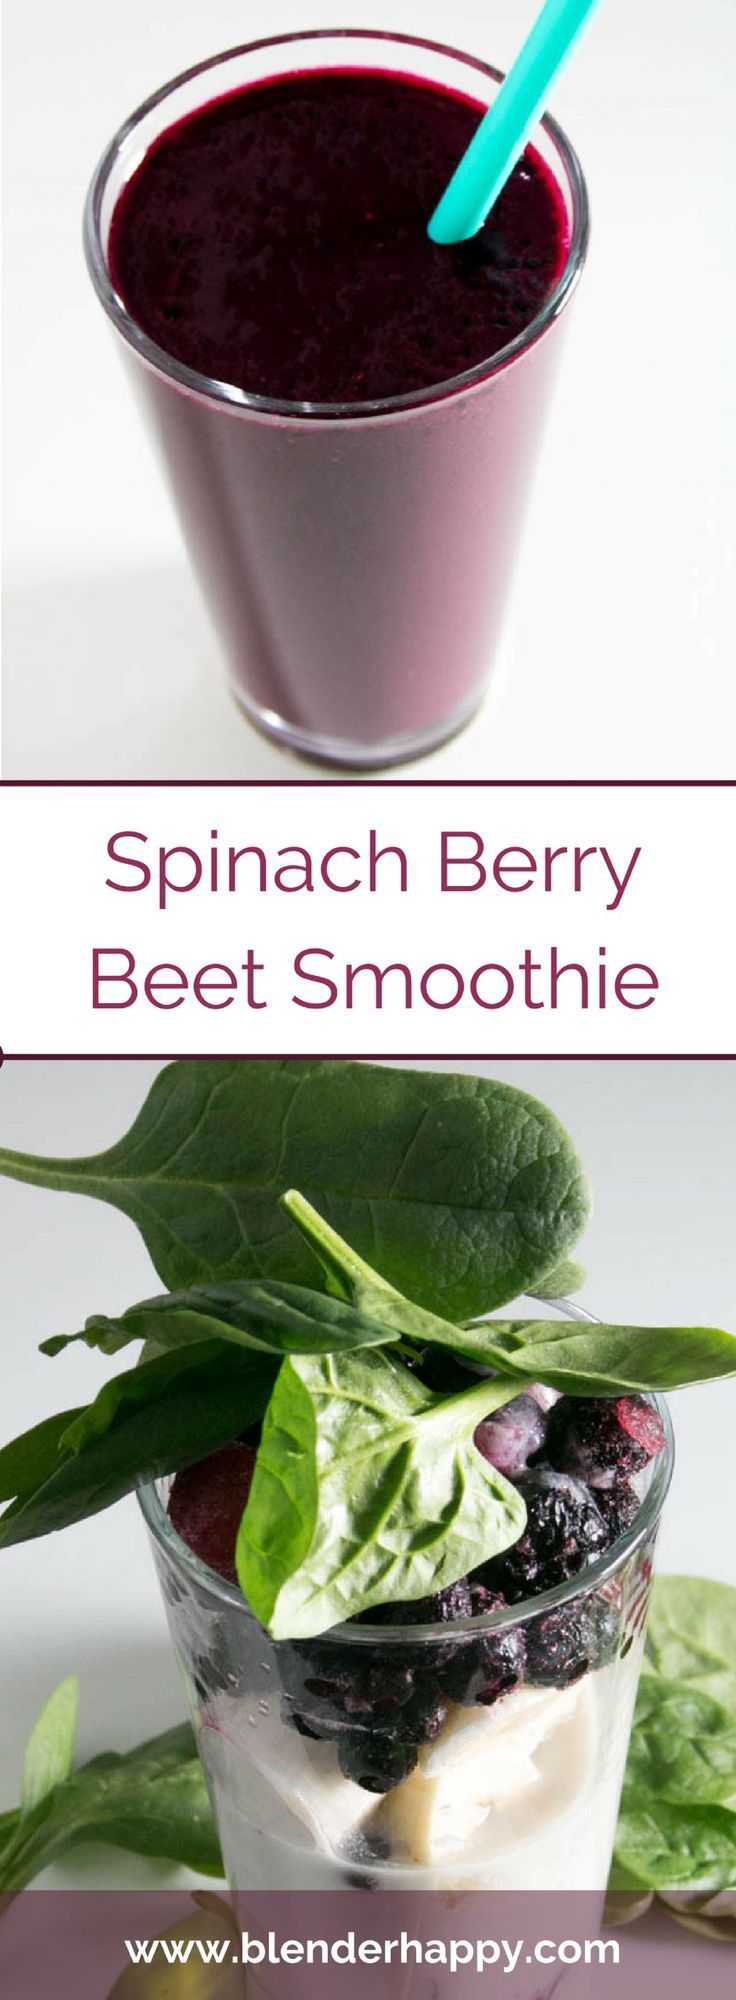 Beets are a great addition to your smoothie. Give this easy and tasty spinach berry beet smoothie a try.  via /blenderhappy/